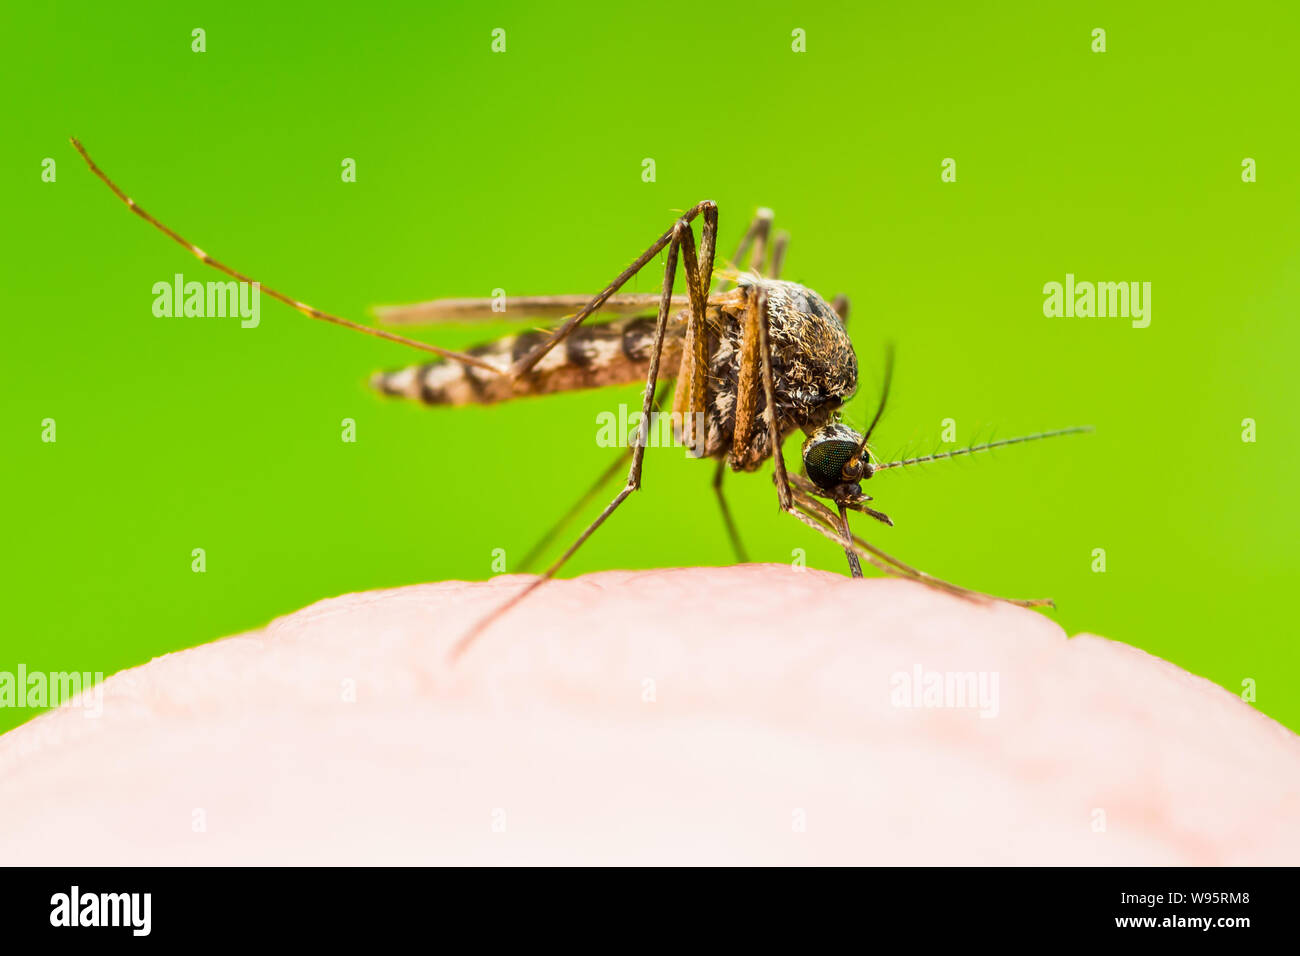 Yellow Fever, Malaria or Zika Virus Infected Mosquito Insect Macro on Green Background Stock Photo